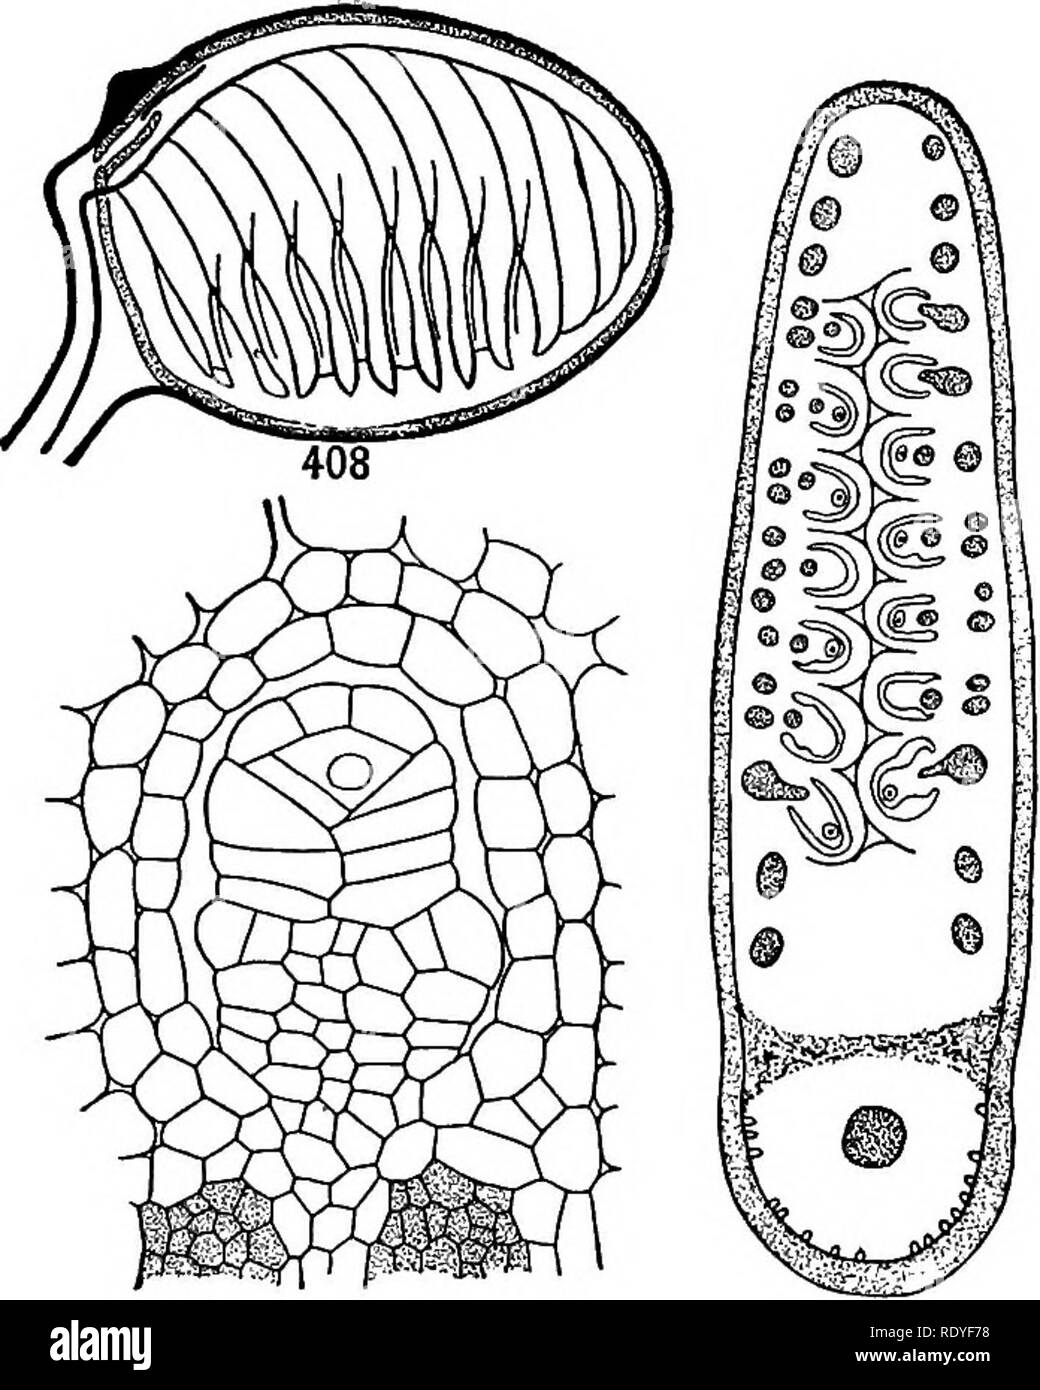 . A textbook of botany for colleges and universities ... Botany. PTERIDOPHYTES 177 that is, by the fusion of lateral branches (p. 152). The sporocarp seems to be a modified leaf blade or blades enclosing a group of sori (fig. 408). In Marsilea the sporocarp is somewhat bean-shaped, each sorus being in a cavity that ex- tends from the ventral side towards the dorsal (fig. 409). Lining, each cavity is a delicate indusium com- pletely investing the sorus, which contains both micro- sporangia and megaspo- rangia (fig. 410). In the microsporangia all the mother cells function in producing microspor Stock Photo